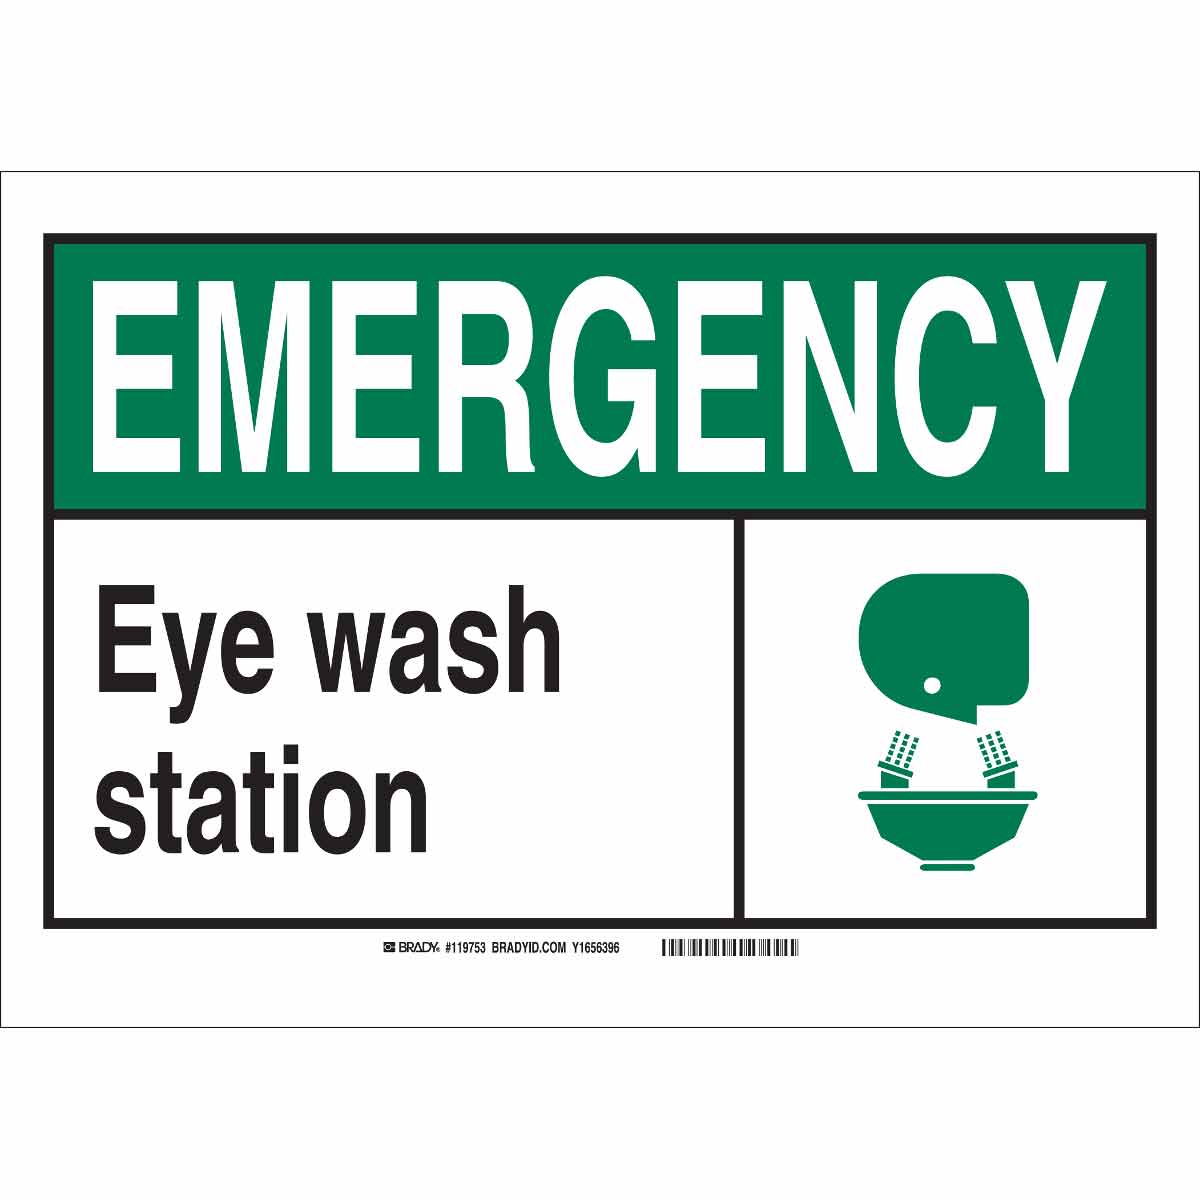 Black/Green/White Brady 119786 PlasticEmergency Safety Shower and Eye Wash Station Office and Facility Sign 